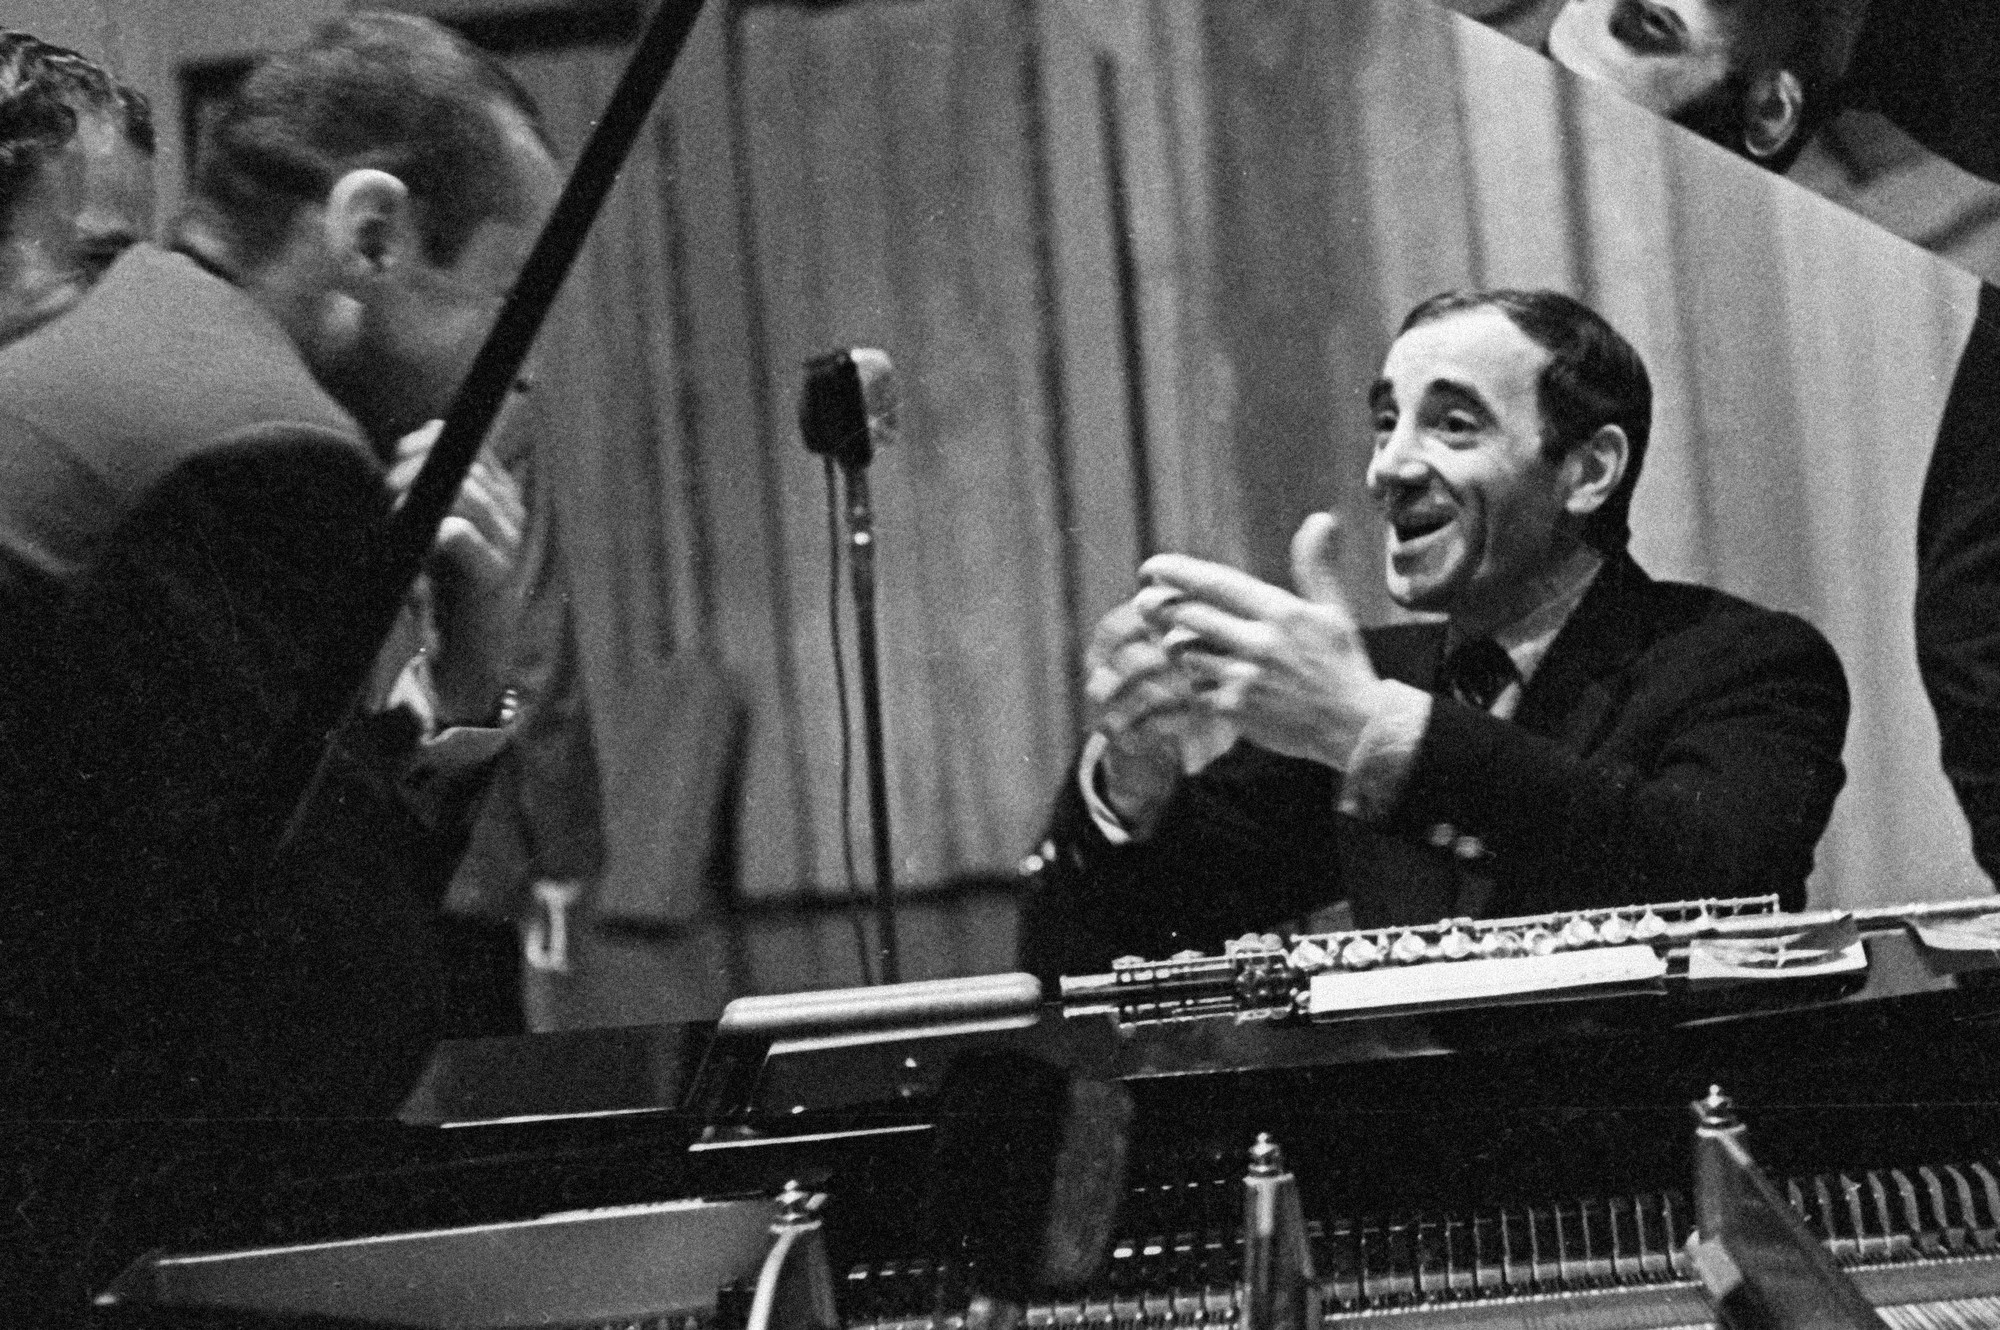 Charles Aznavour – our catalogue includes several of his works